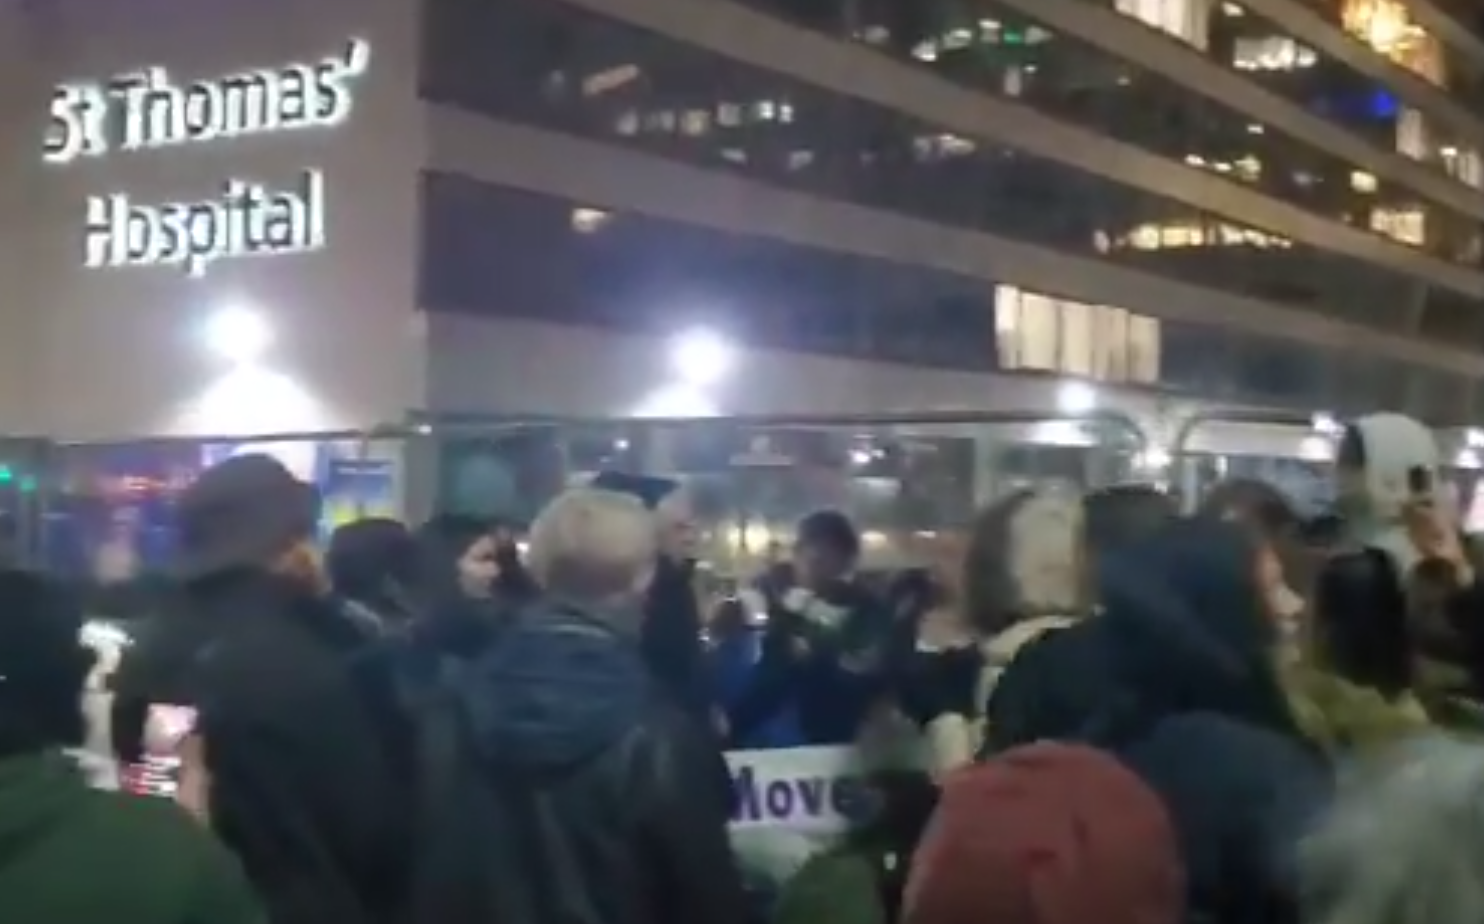 St Thomas Hospital: crowd filmed singing “Covid is a scam”